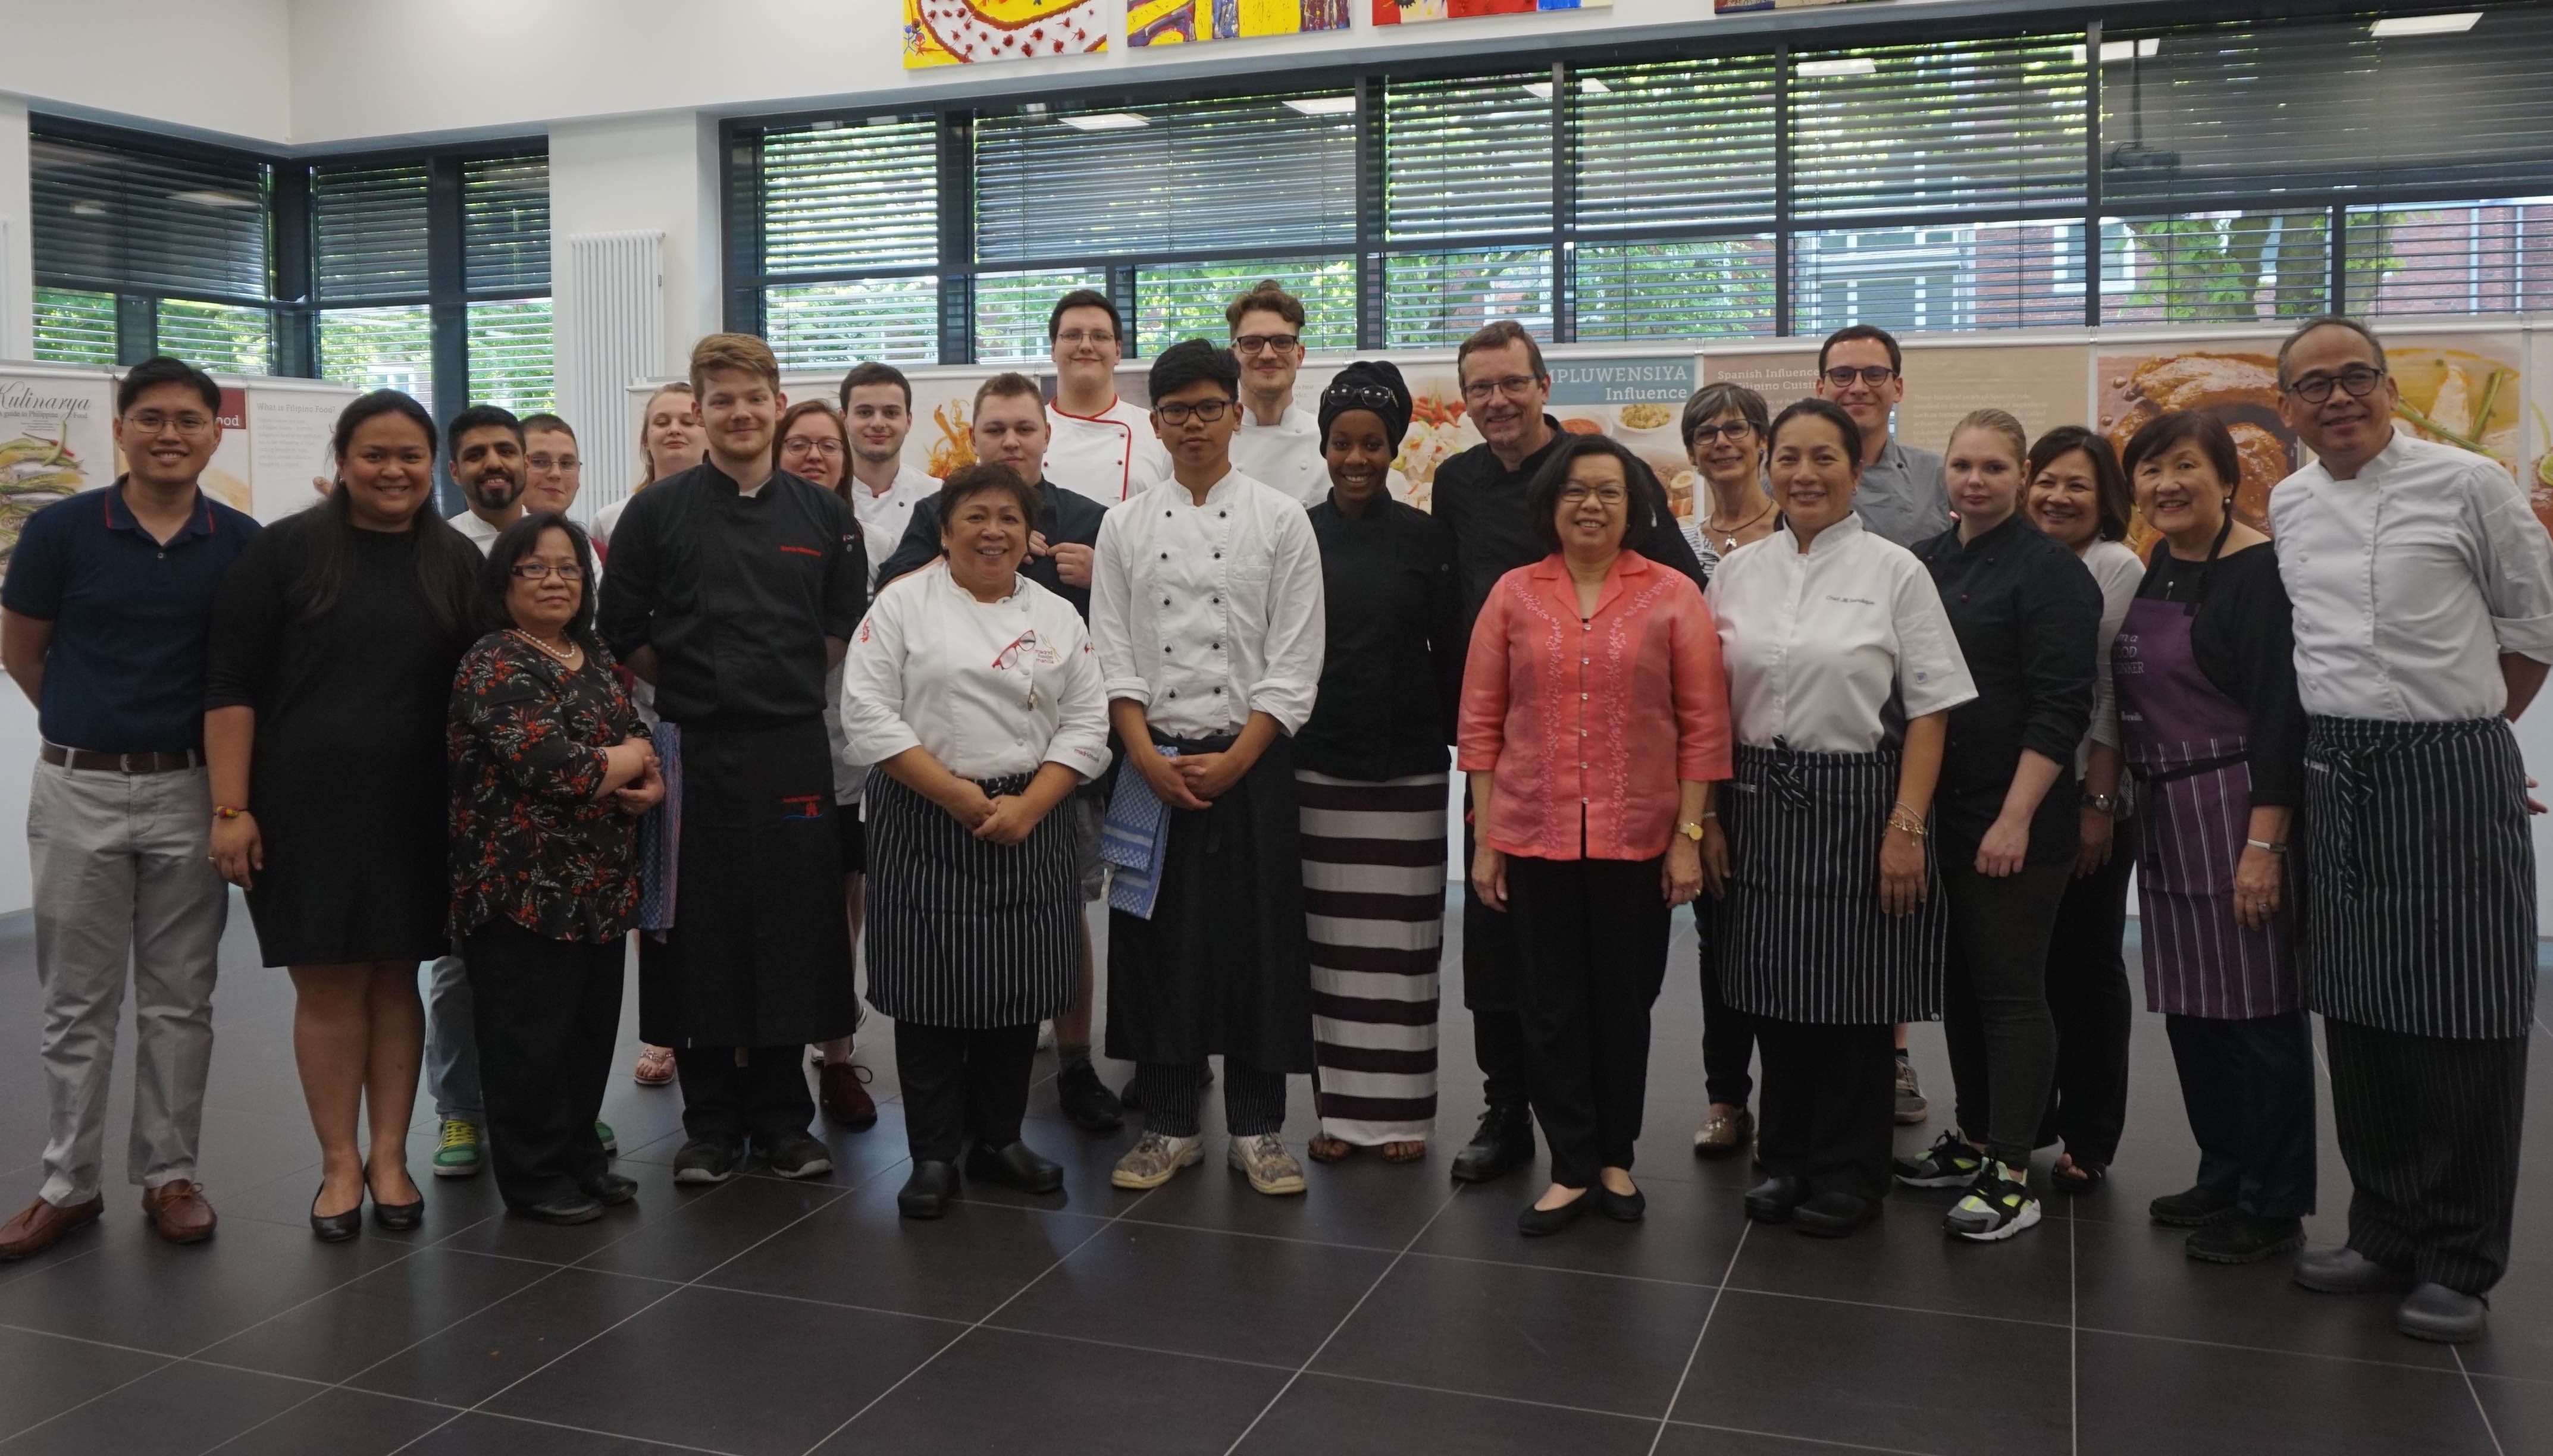 TEAM PH. Philippine Ambassador to Berlin Melita Sta Maria-Thomeczek (6th from R), chef Myrna Segismundo (5th from L), Third Secretary and Vice Consul Alvin Malasig (L), Cultural Attaché Mylah Rubio (2nd from L), chef Jill Sandique (5th from R), food writer Michaela Fenix (2nd from R), and chef Raul Ramos (R) with students and faculty of Hotelfachschule Hamburg. 